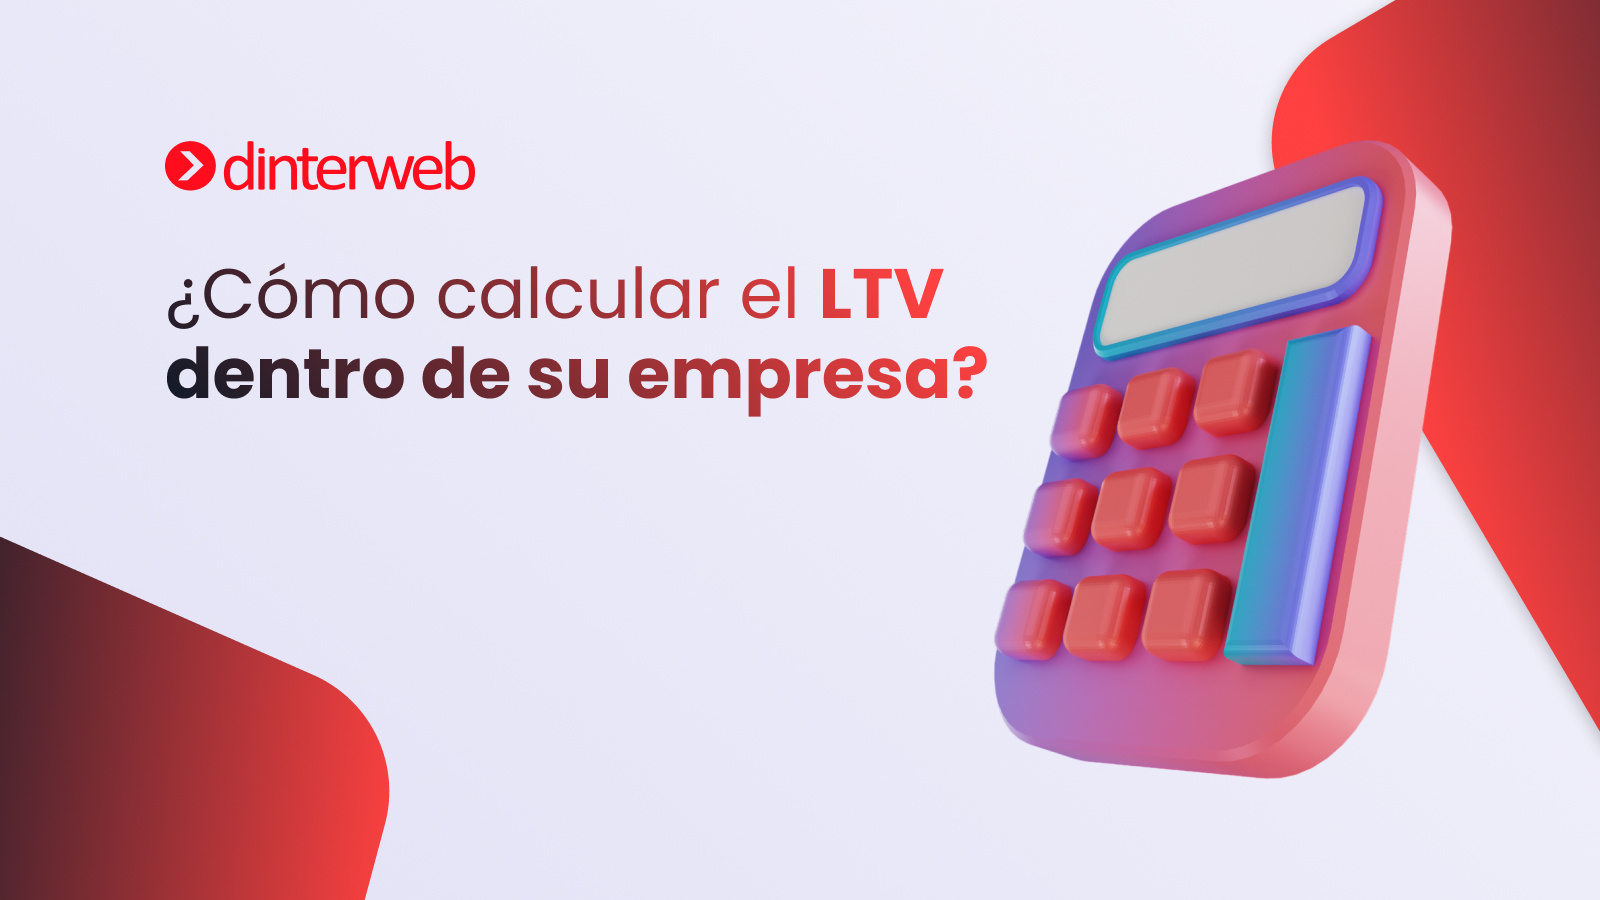 How to calculate LTV within your company?